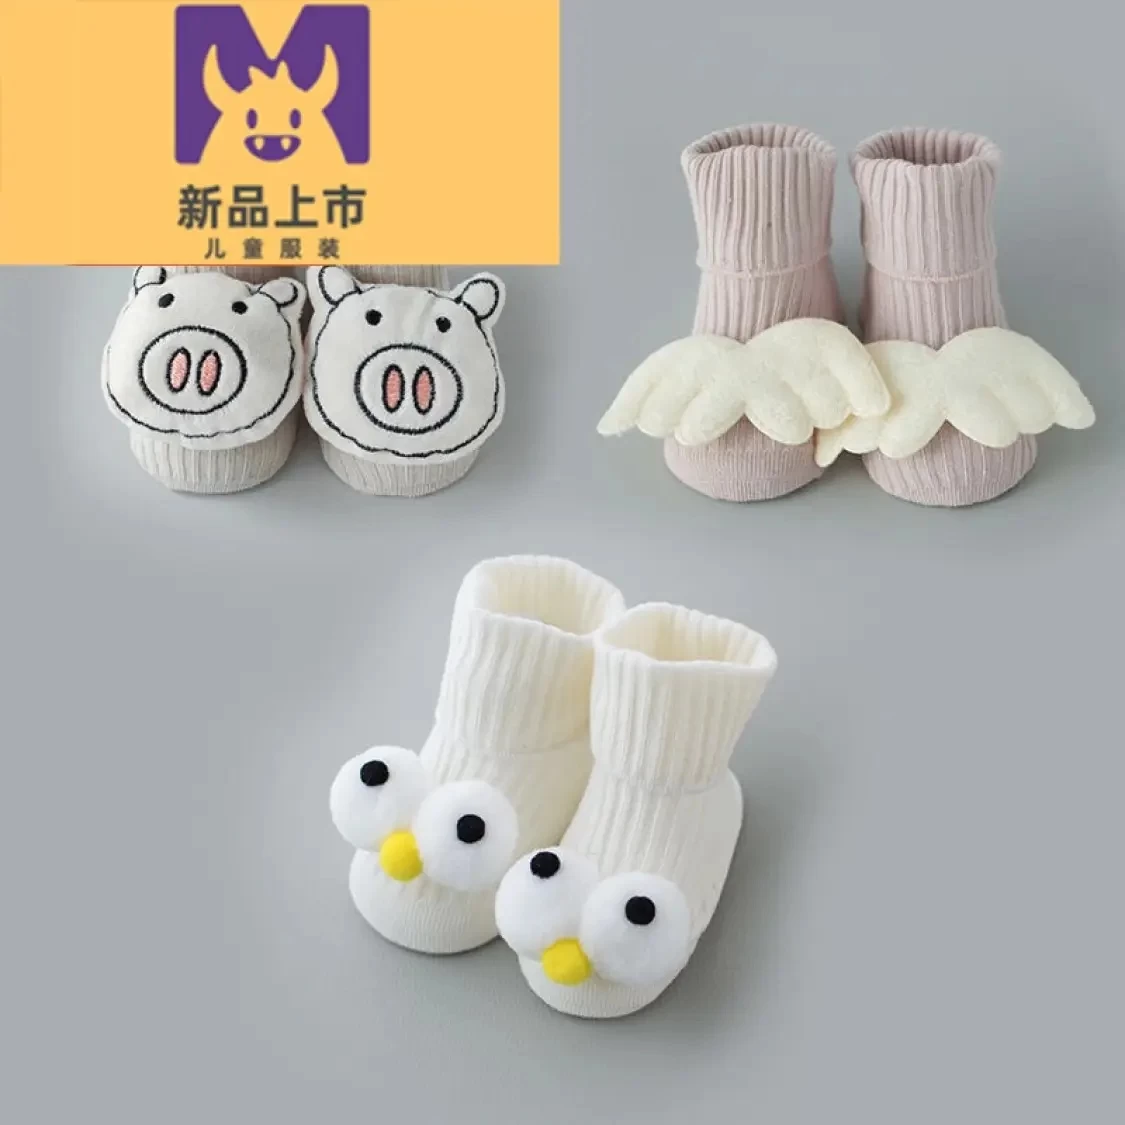 Children's socks suitable for babies and infants, a supplier specializing in the production of this kind of socks